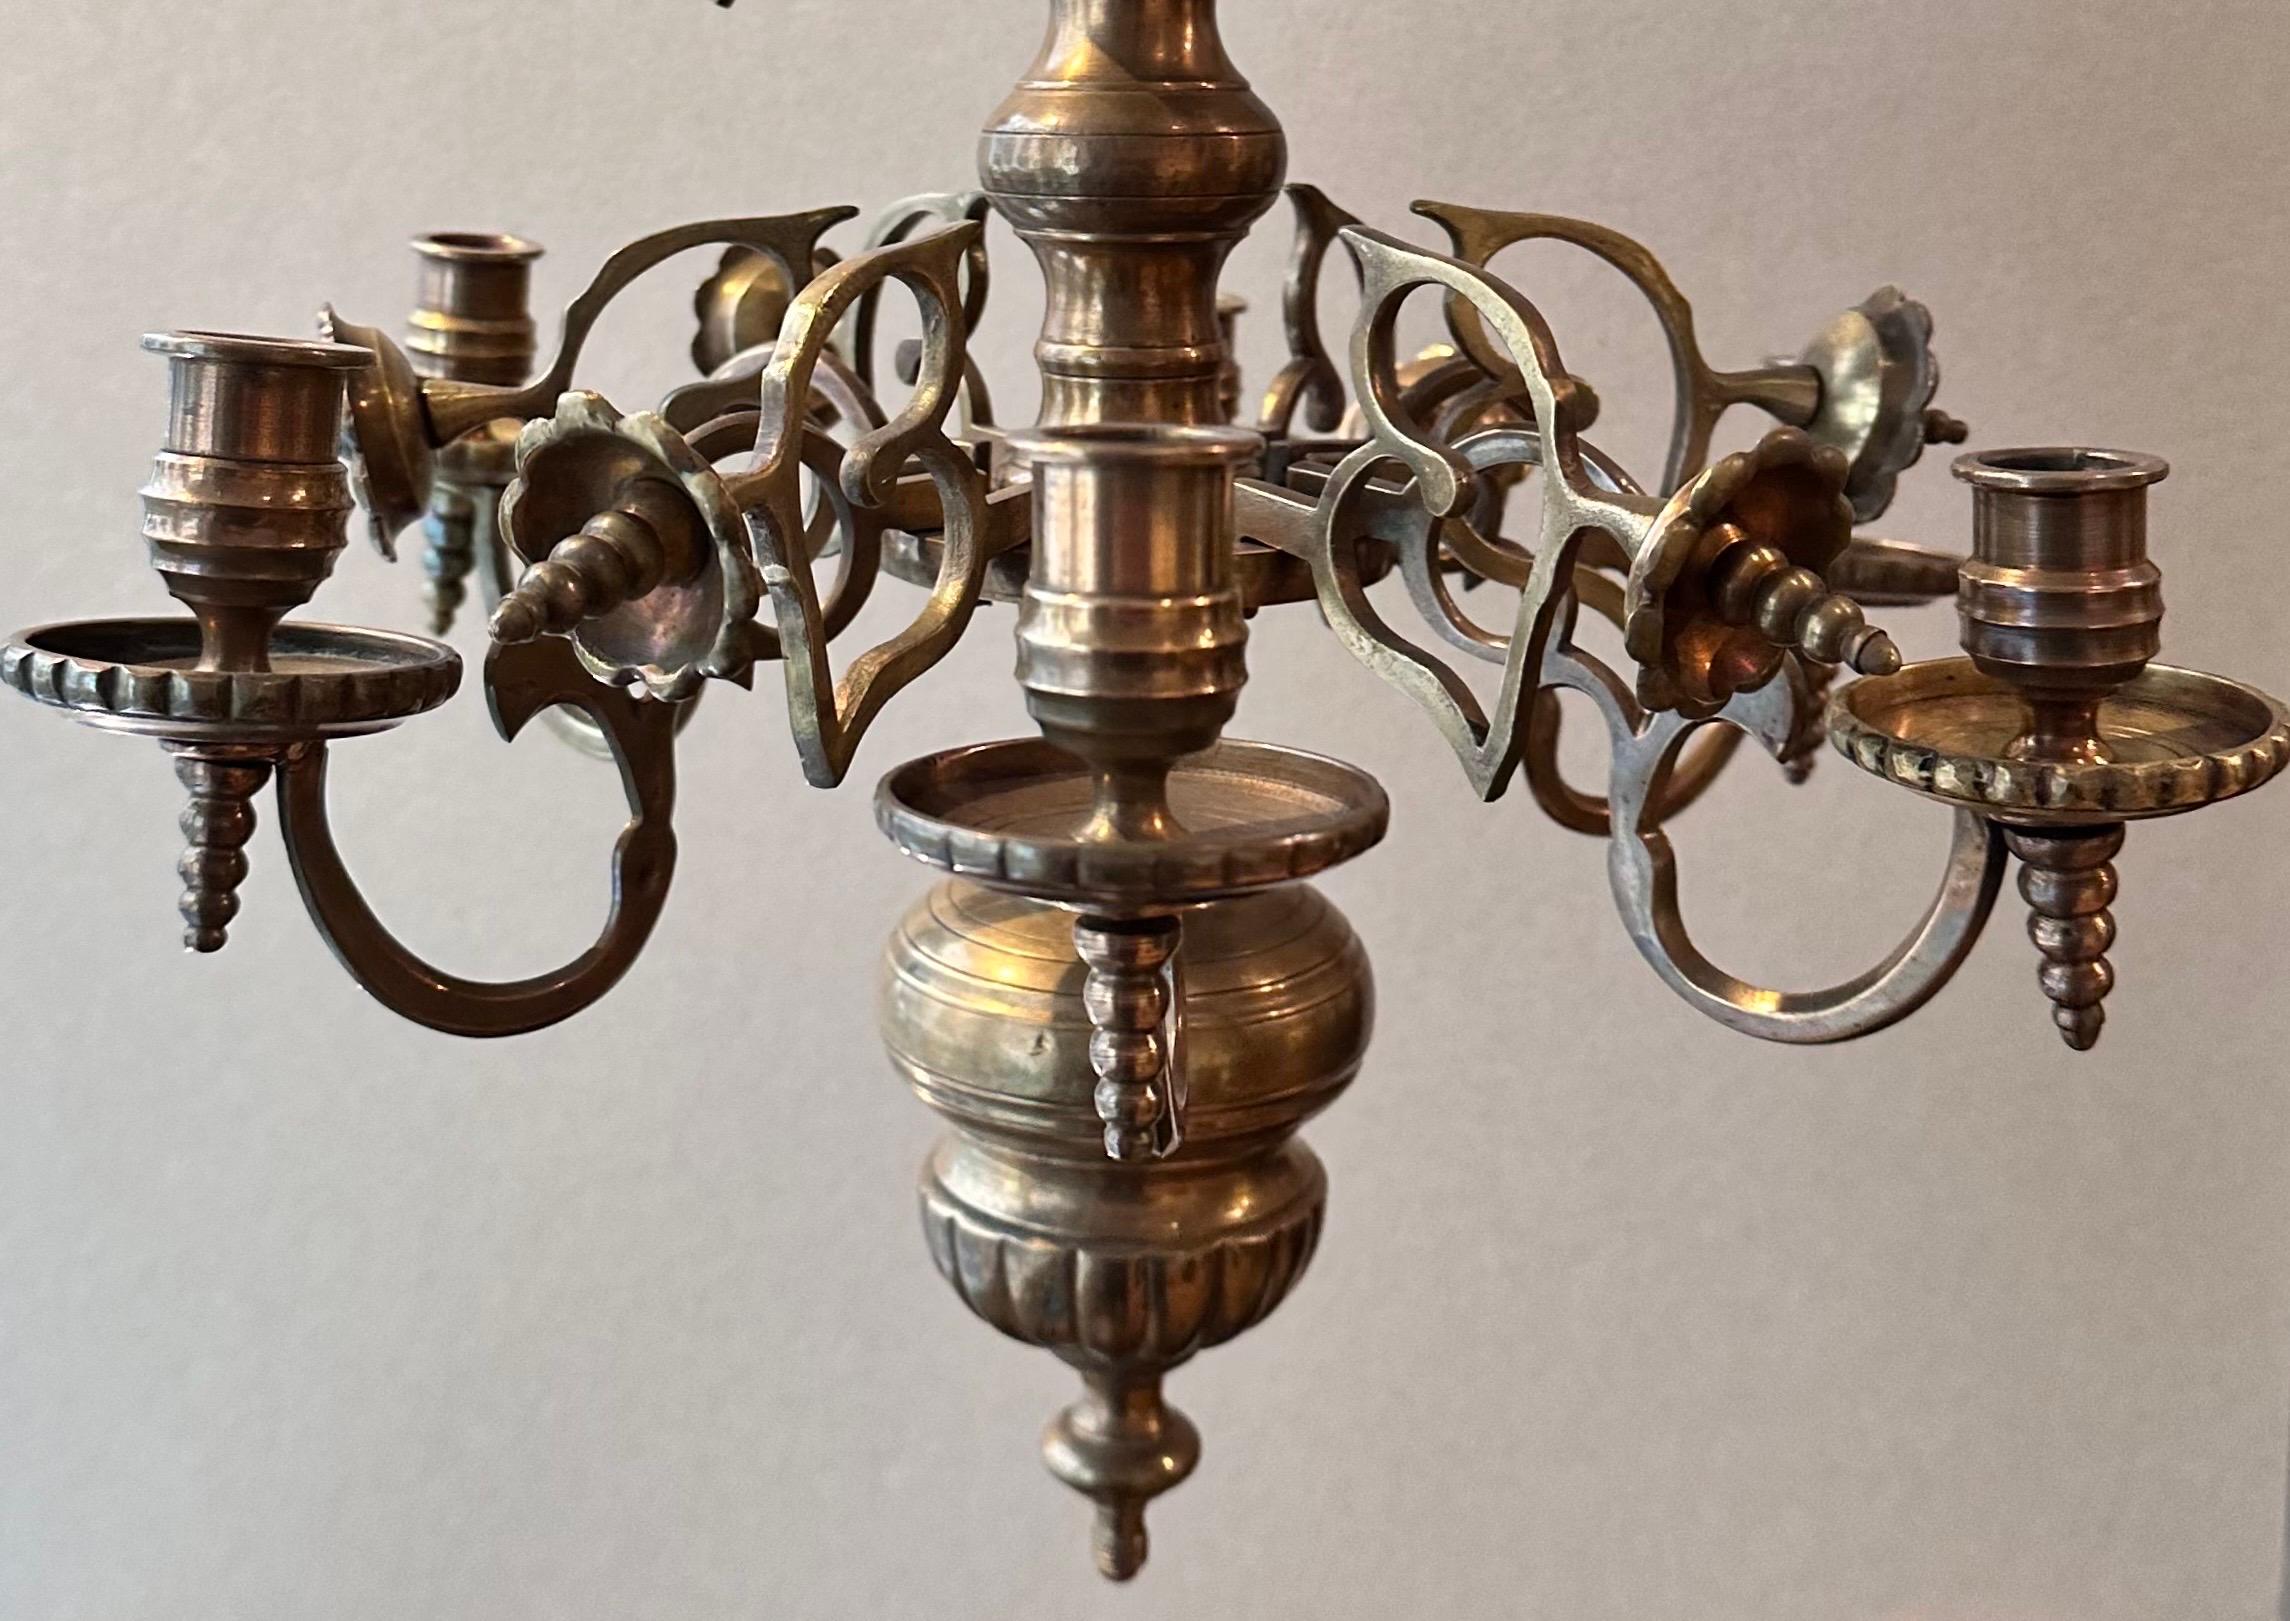 Small Synagogue Bronze Chandelier, 19th Century 17th Century Style For Sale 6